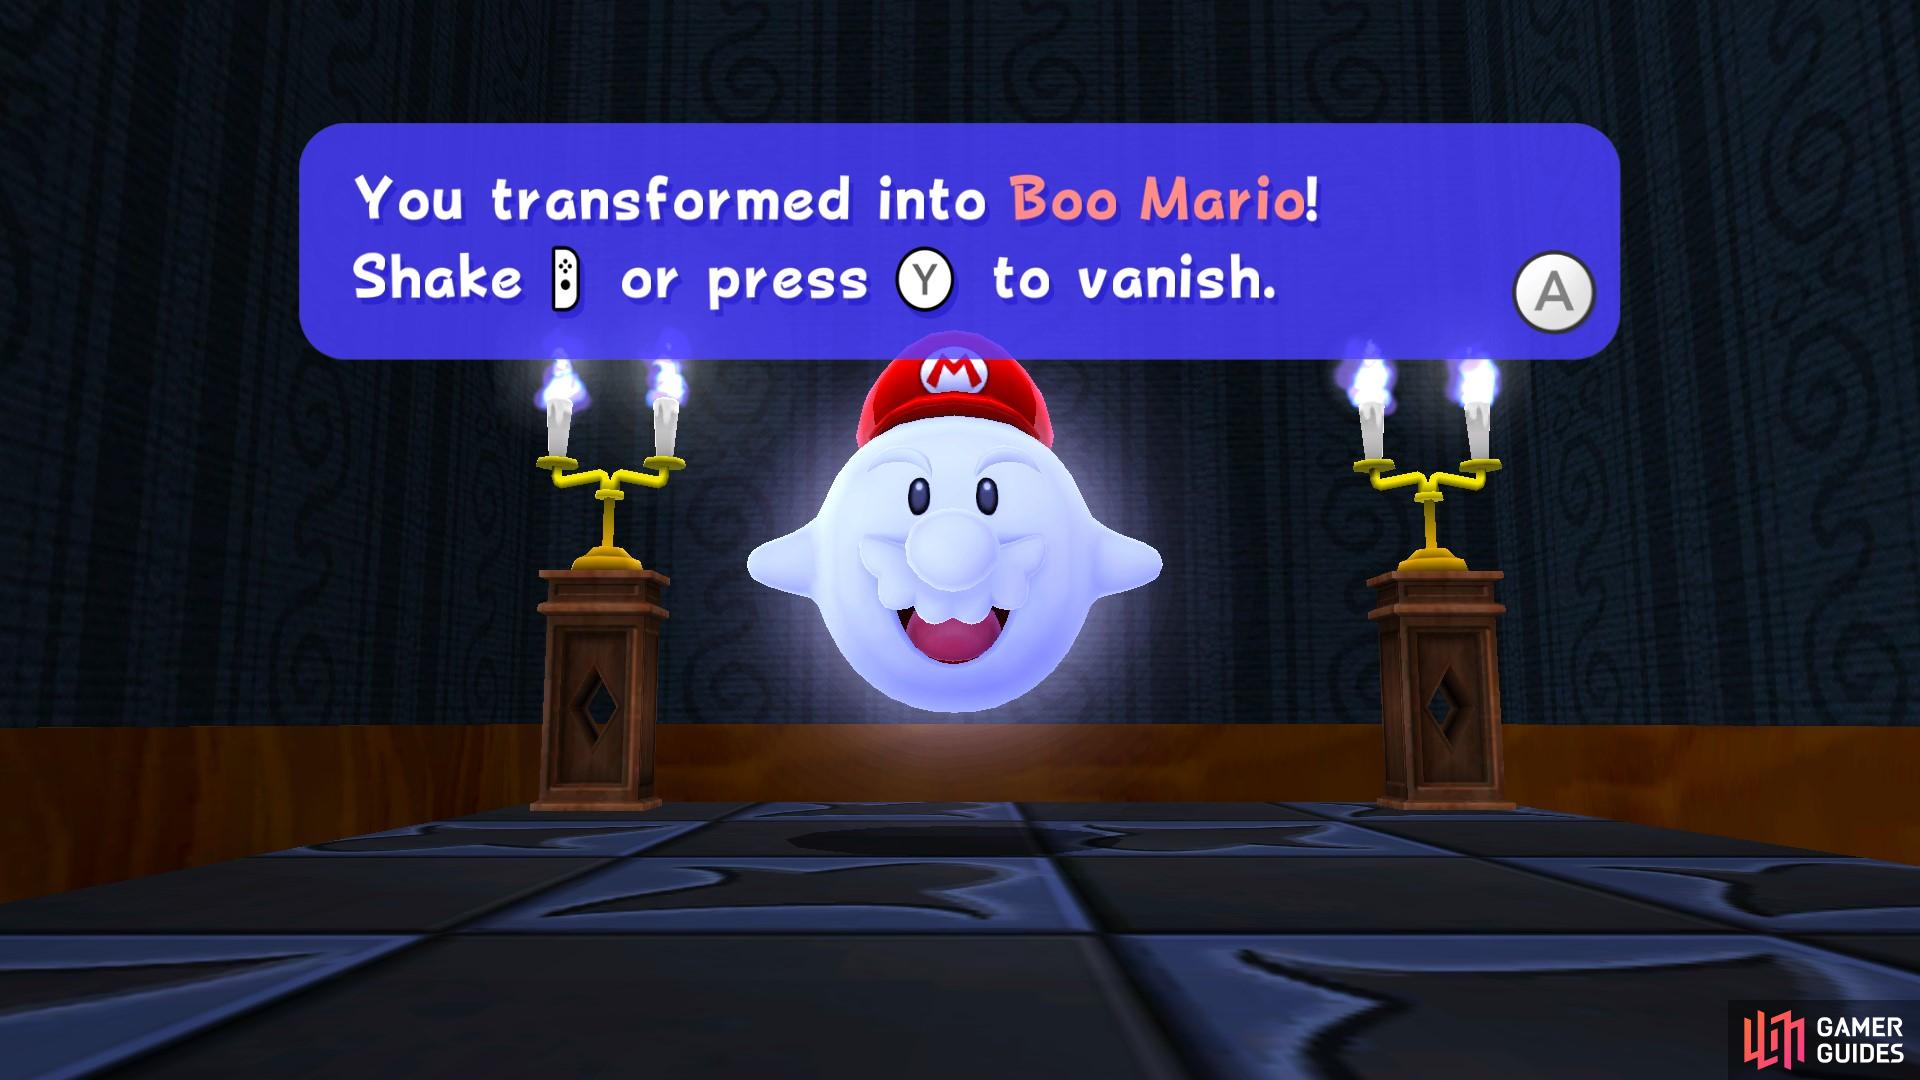 In Ghostly Galaxy, you'll be introduced to Boo Mario!